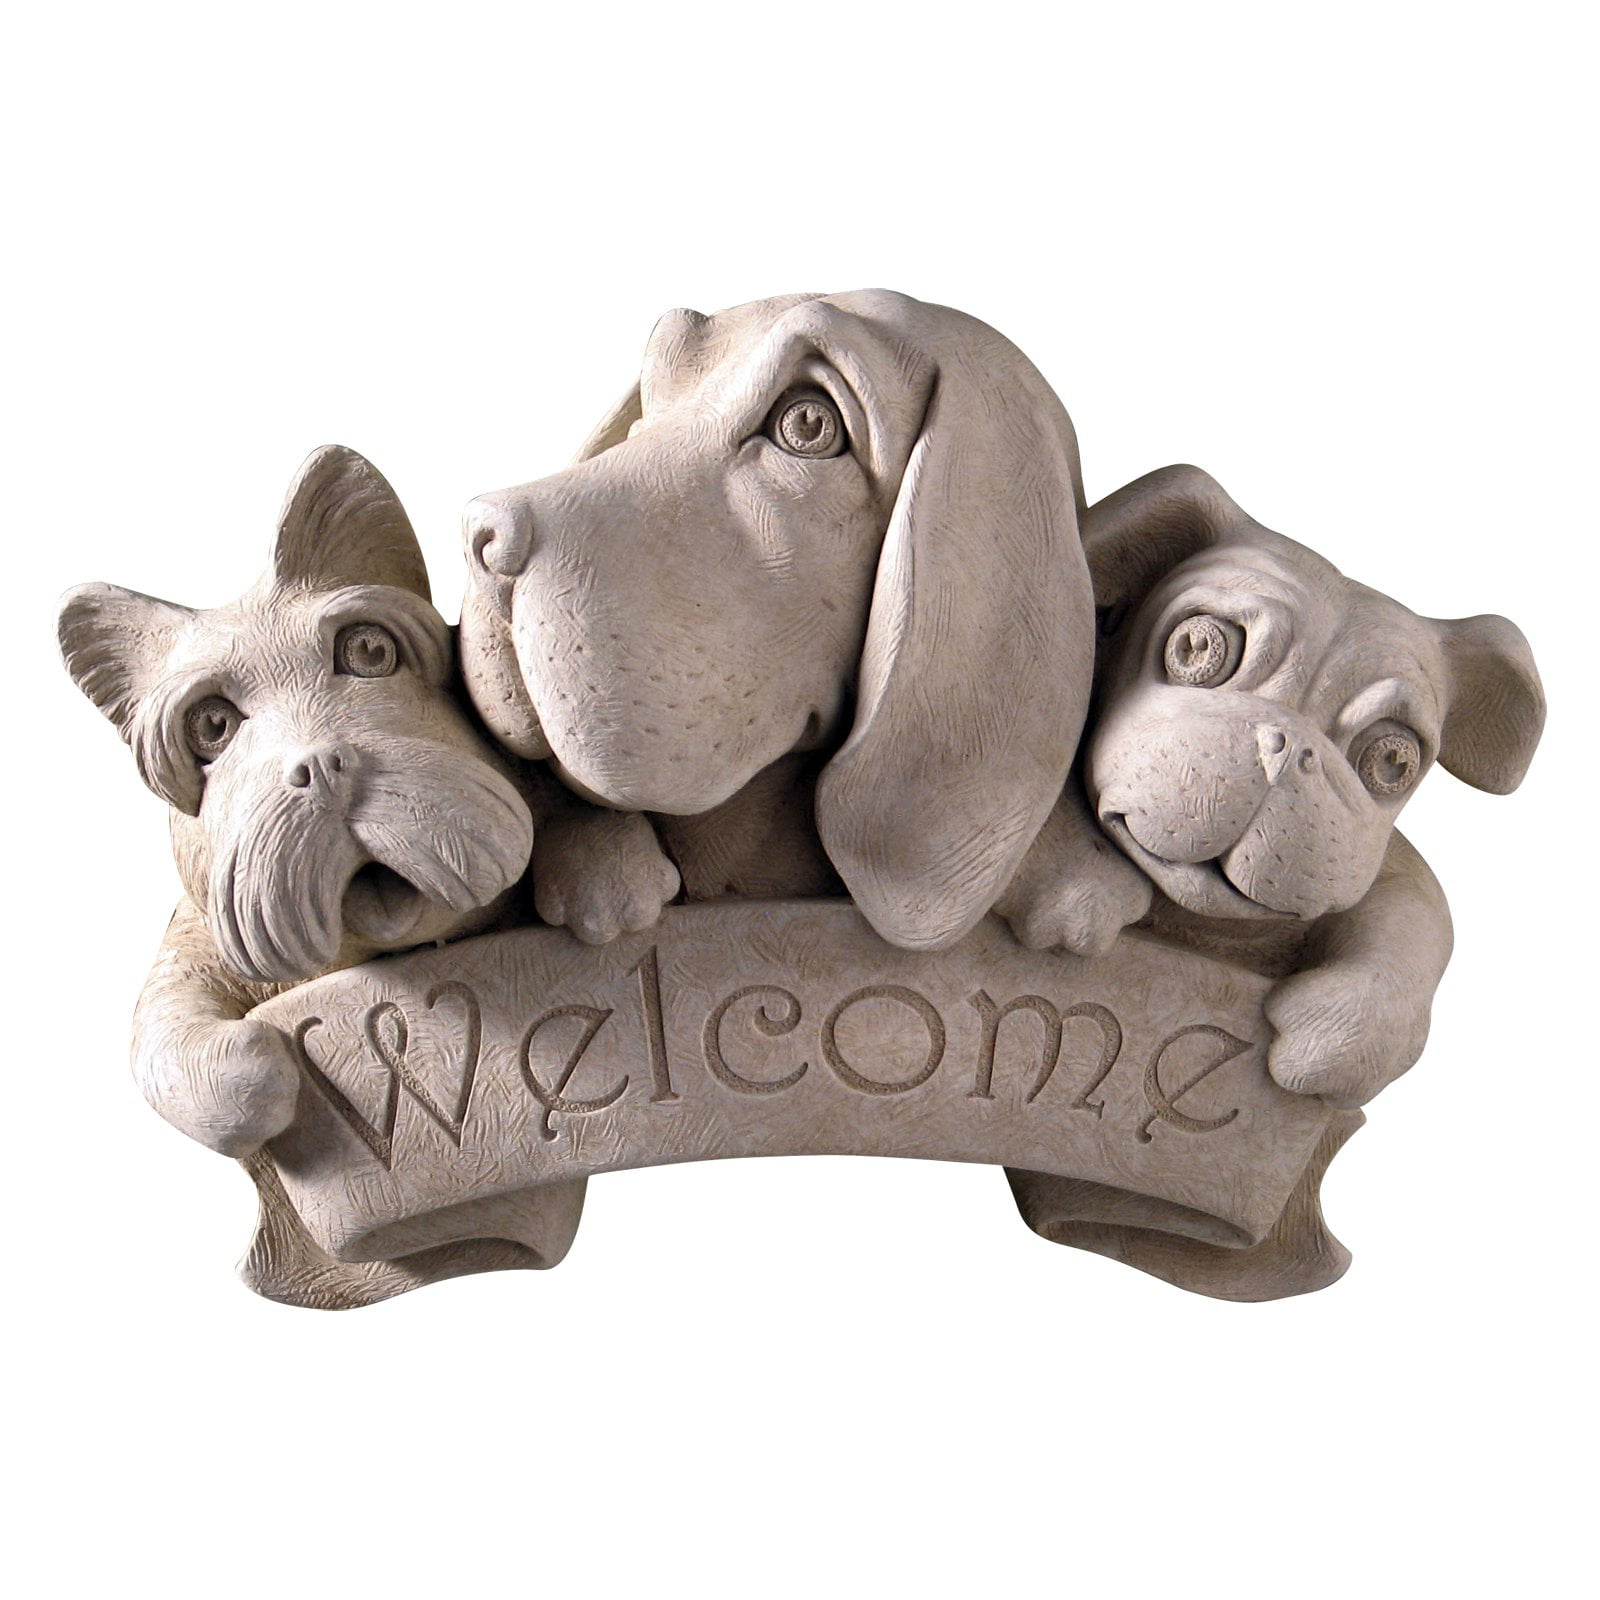 Carruth Studios Road Trip Funny Dog Lovers Stone Garden Ornament Plaque Gift 